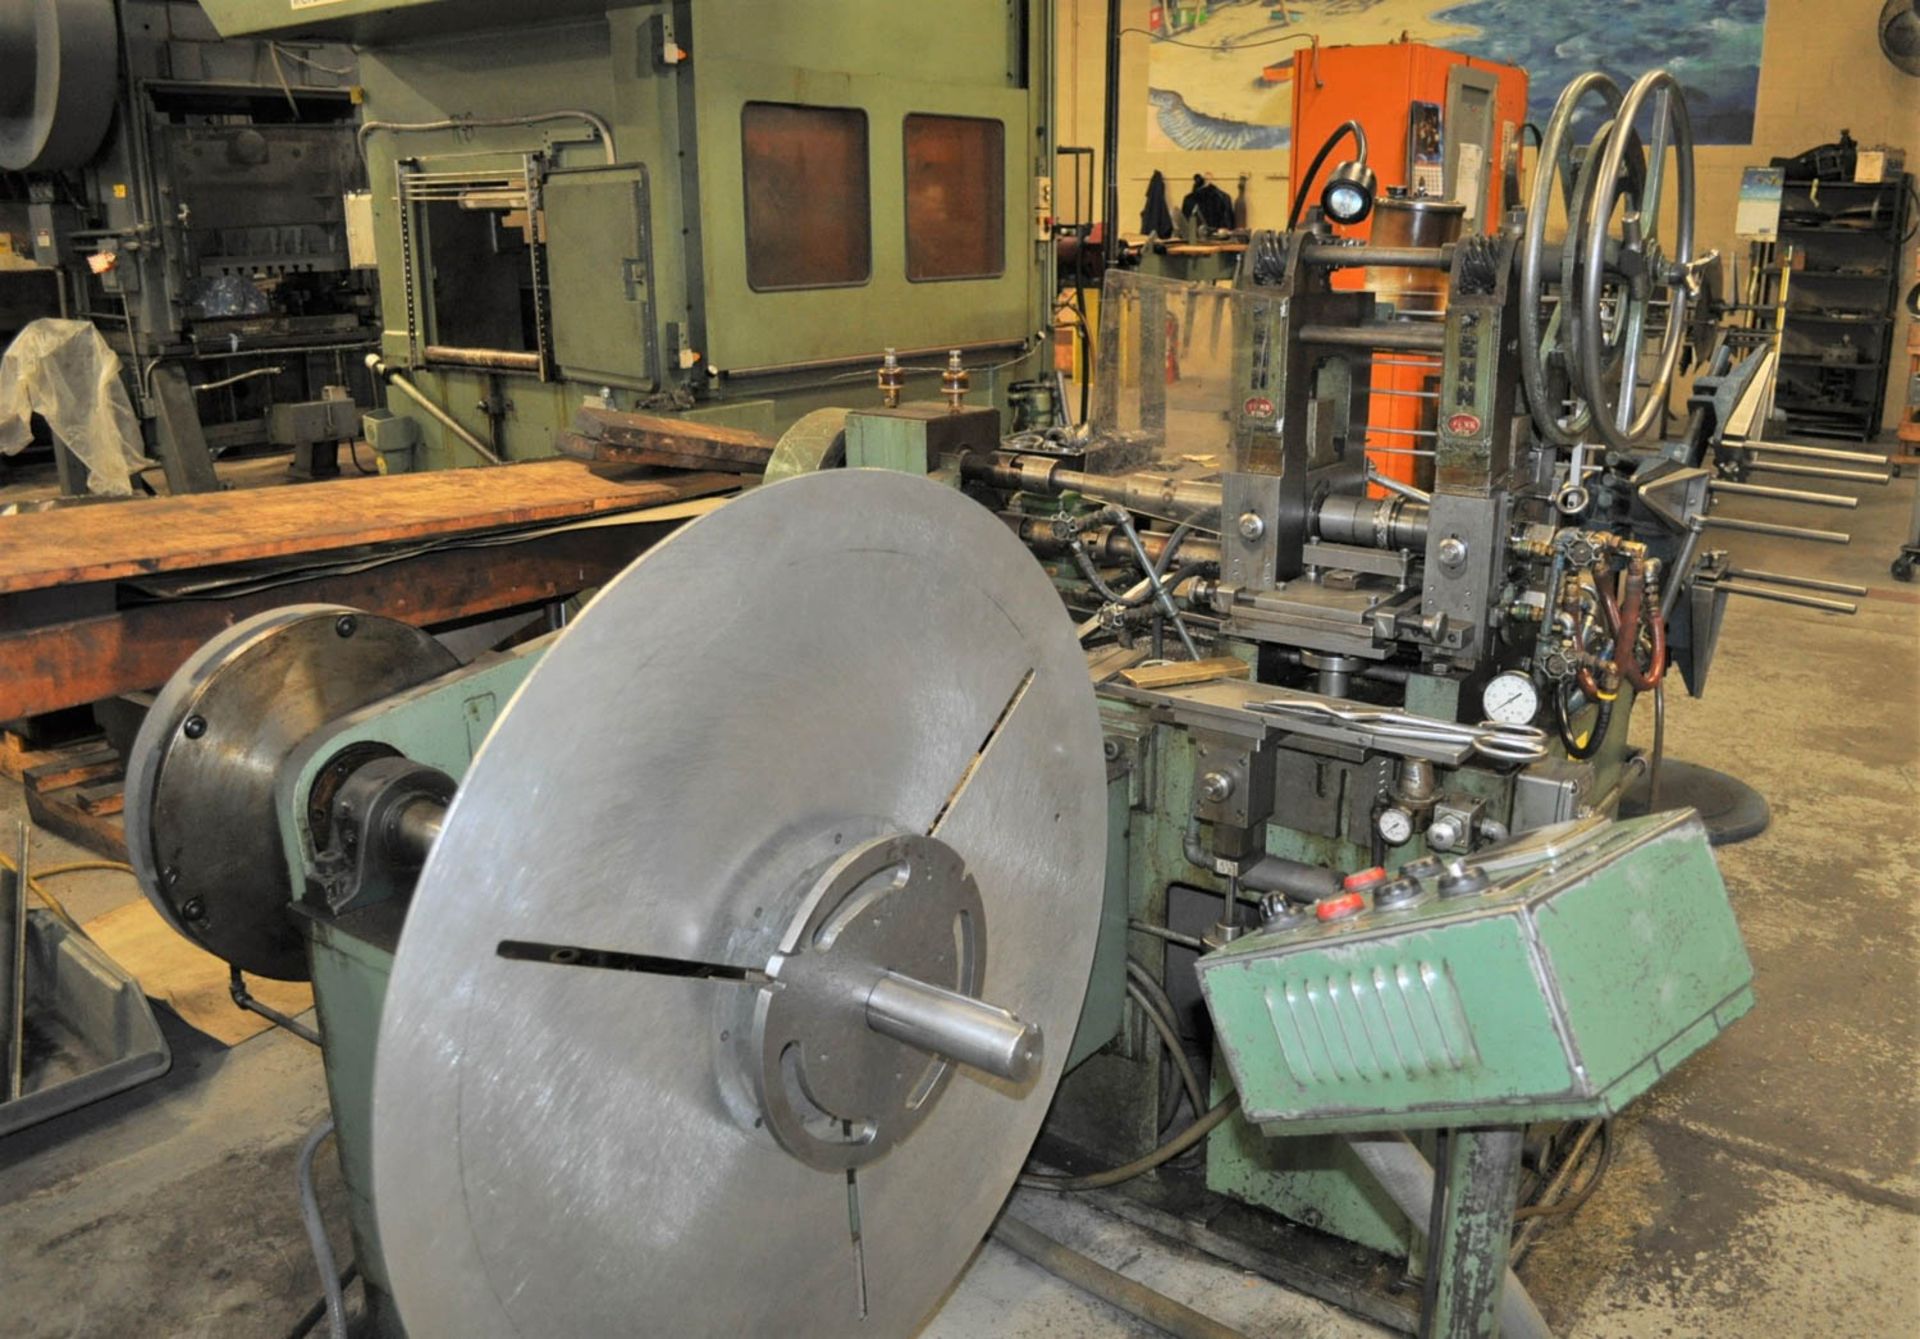 3" X 8" FENN 2-HI ROLLING MILL, VARI-SPEED CONTROL, CONTROL CONSOLE, APPROXIMATELY 300-FPM, STAND-UP - Image 4 of 6